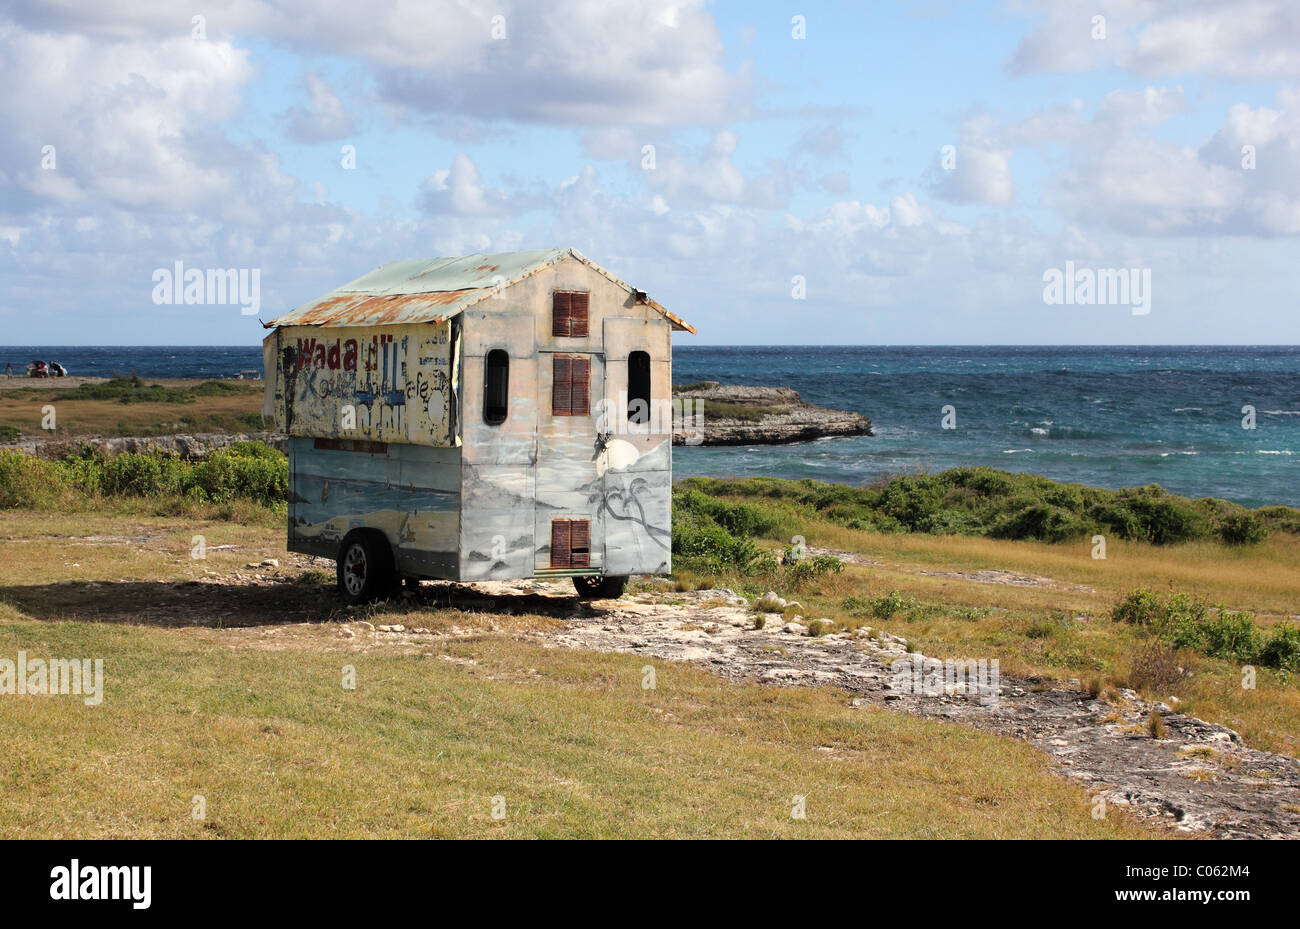 Snack van on the Indian Town Point National Park with Devil's Bridge and Caribbean Ocean in the Distance, Antigua, West Indies. Stock Photo